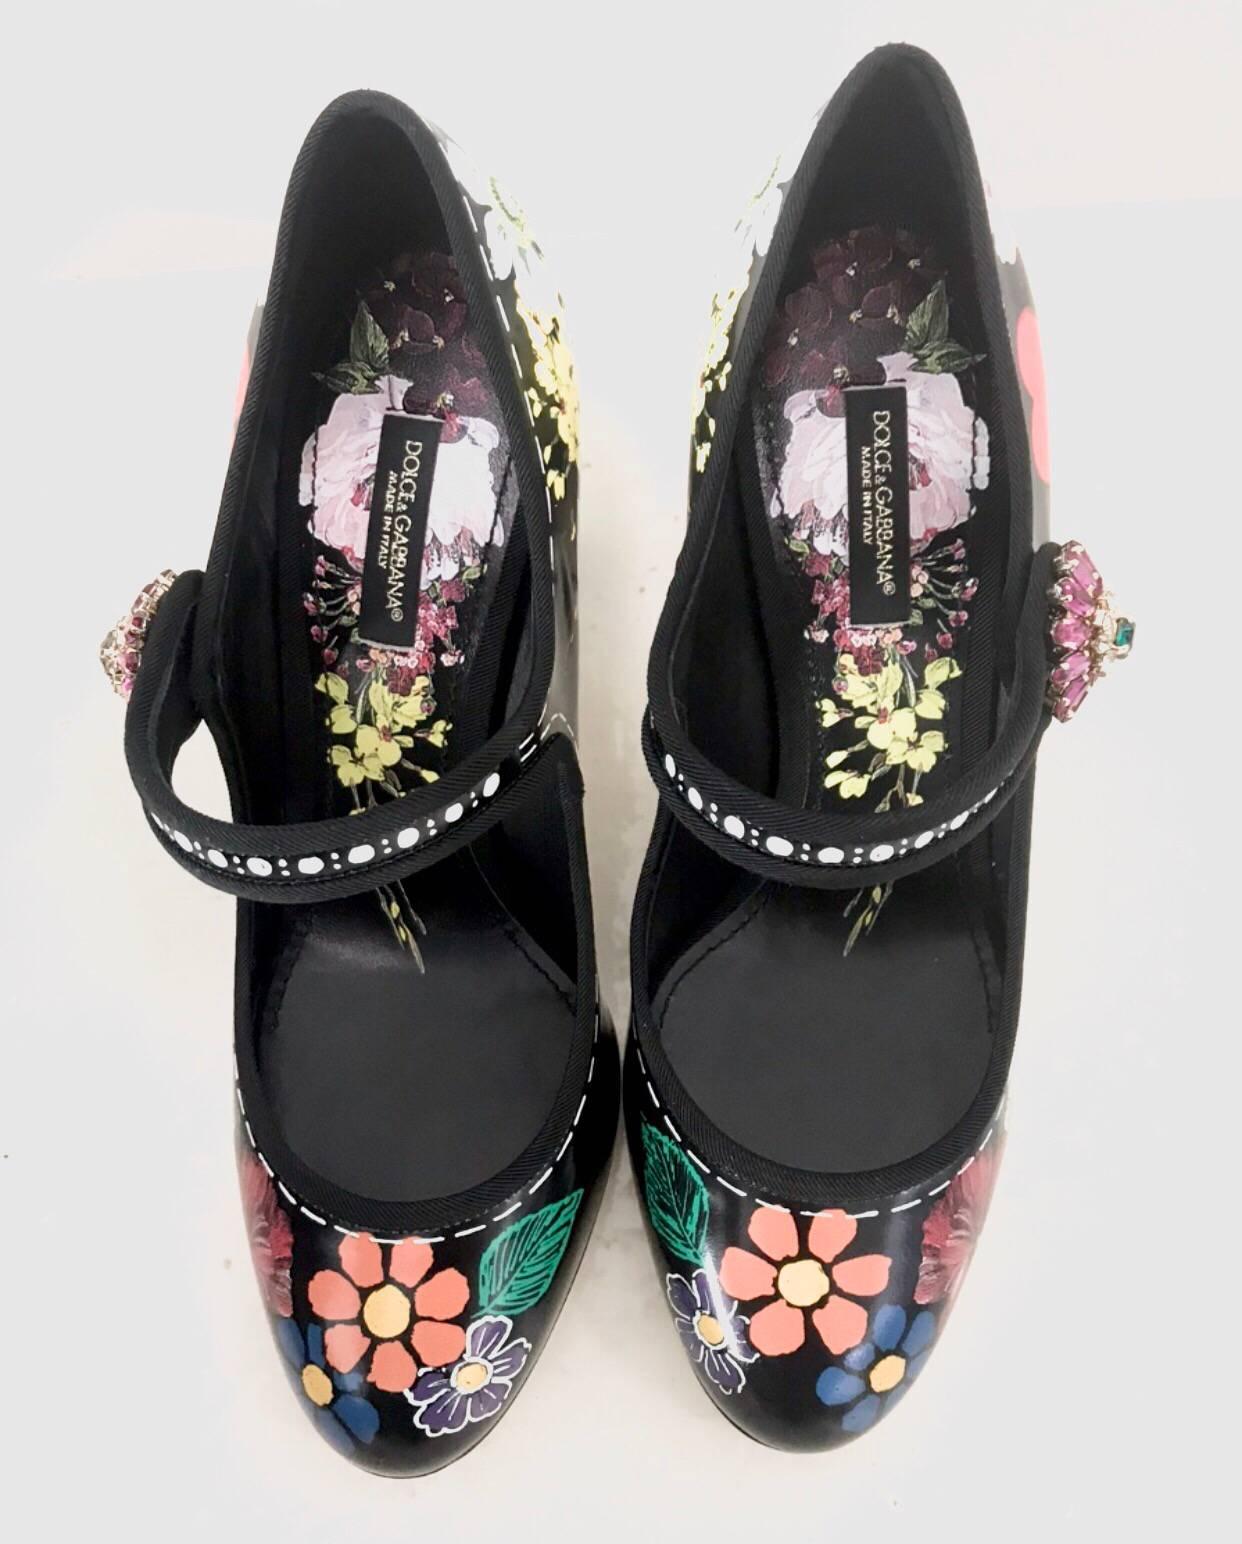 Dolce & Gabbana
Season Fw17

Material Leather
Model Mary Jane 
Print Flowers botton jewerly 
New Condition 
Packaging original box and dust bag 
Delivery dhl express 
Retail Price € 795,00
Size Avaiable TG EU 36- 37- 37.5 - 38.5 - 39